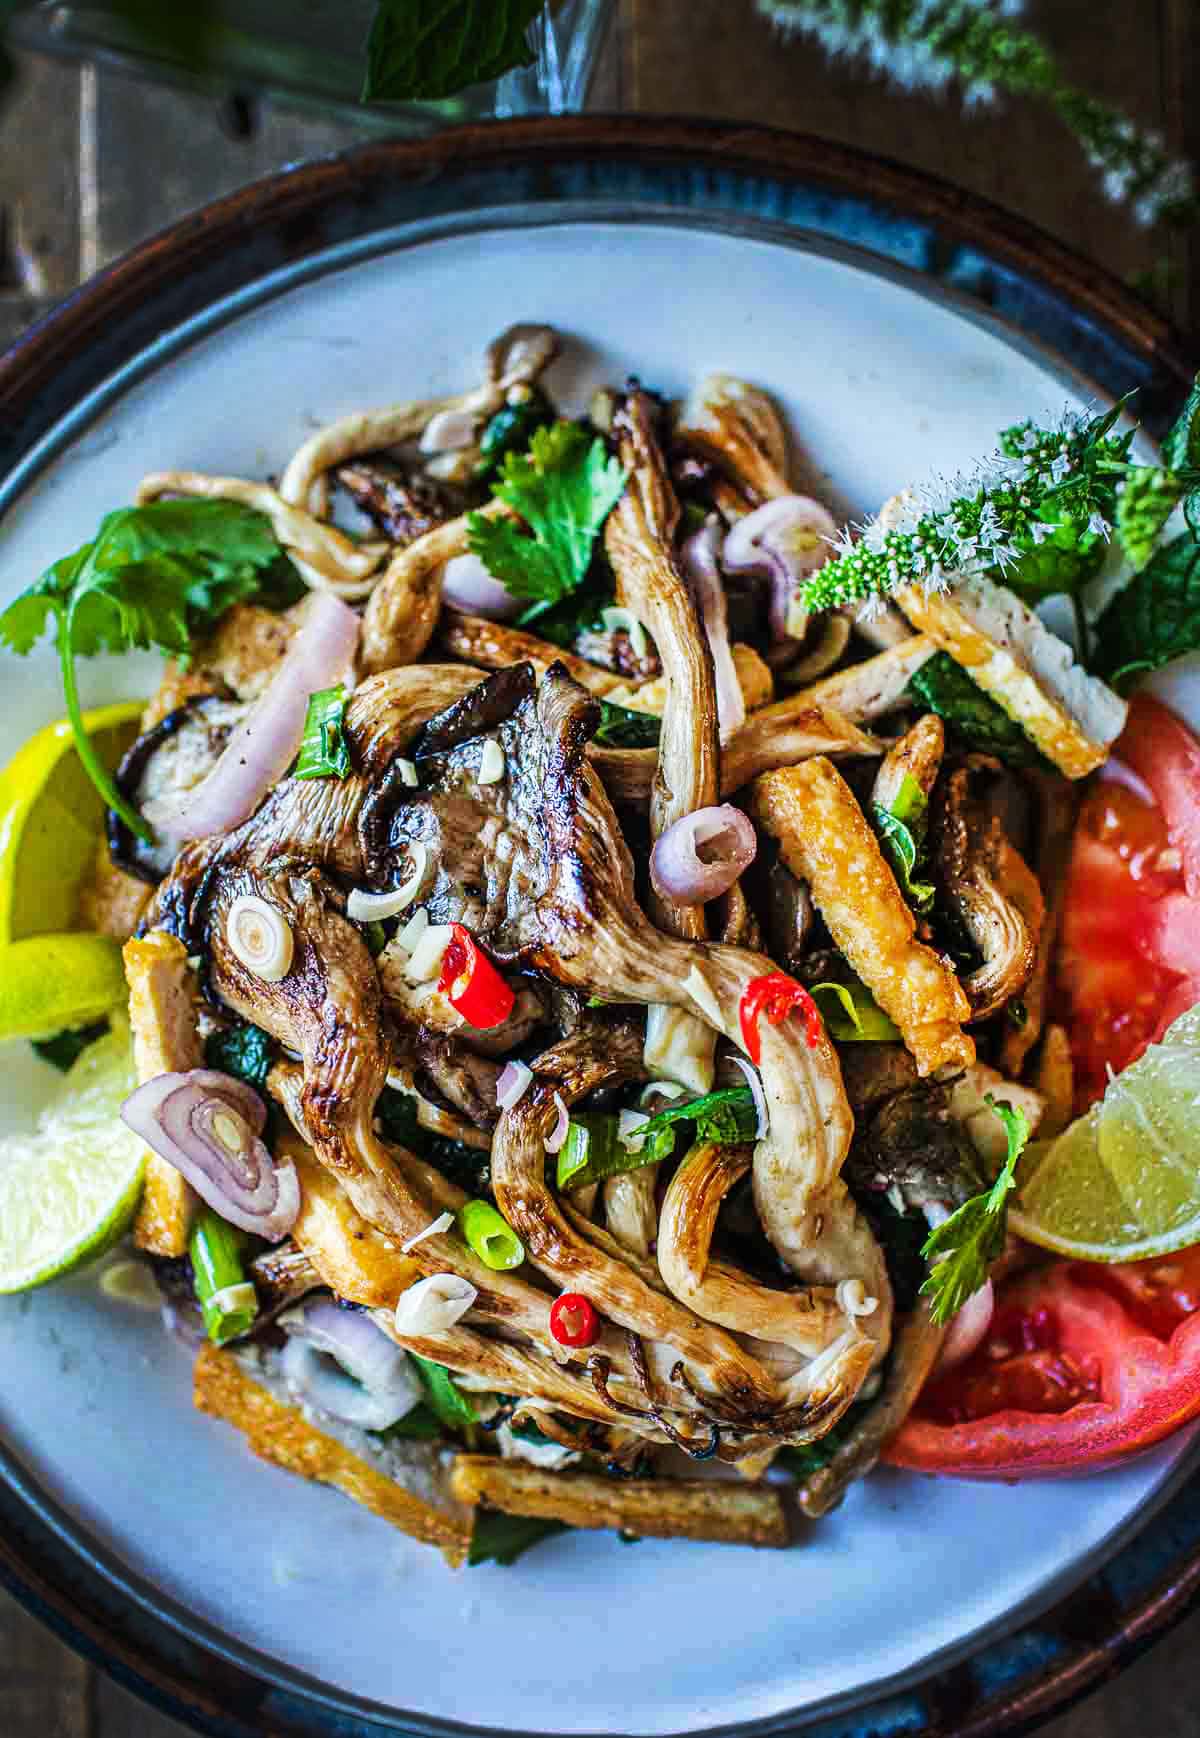 Thai Oyster Mushroom Salad with Tofu is a simple, delicious recipe infused with fresh Thai flavors- lemongrass, shallot, mint, cilantro, and fresh lime juice. A light and healthy meal-all in one dish! 